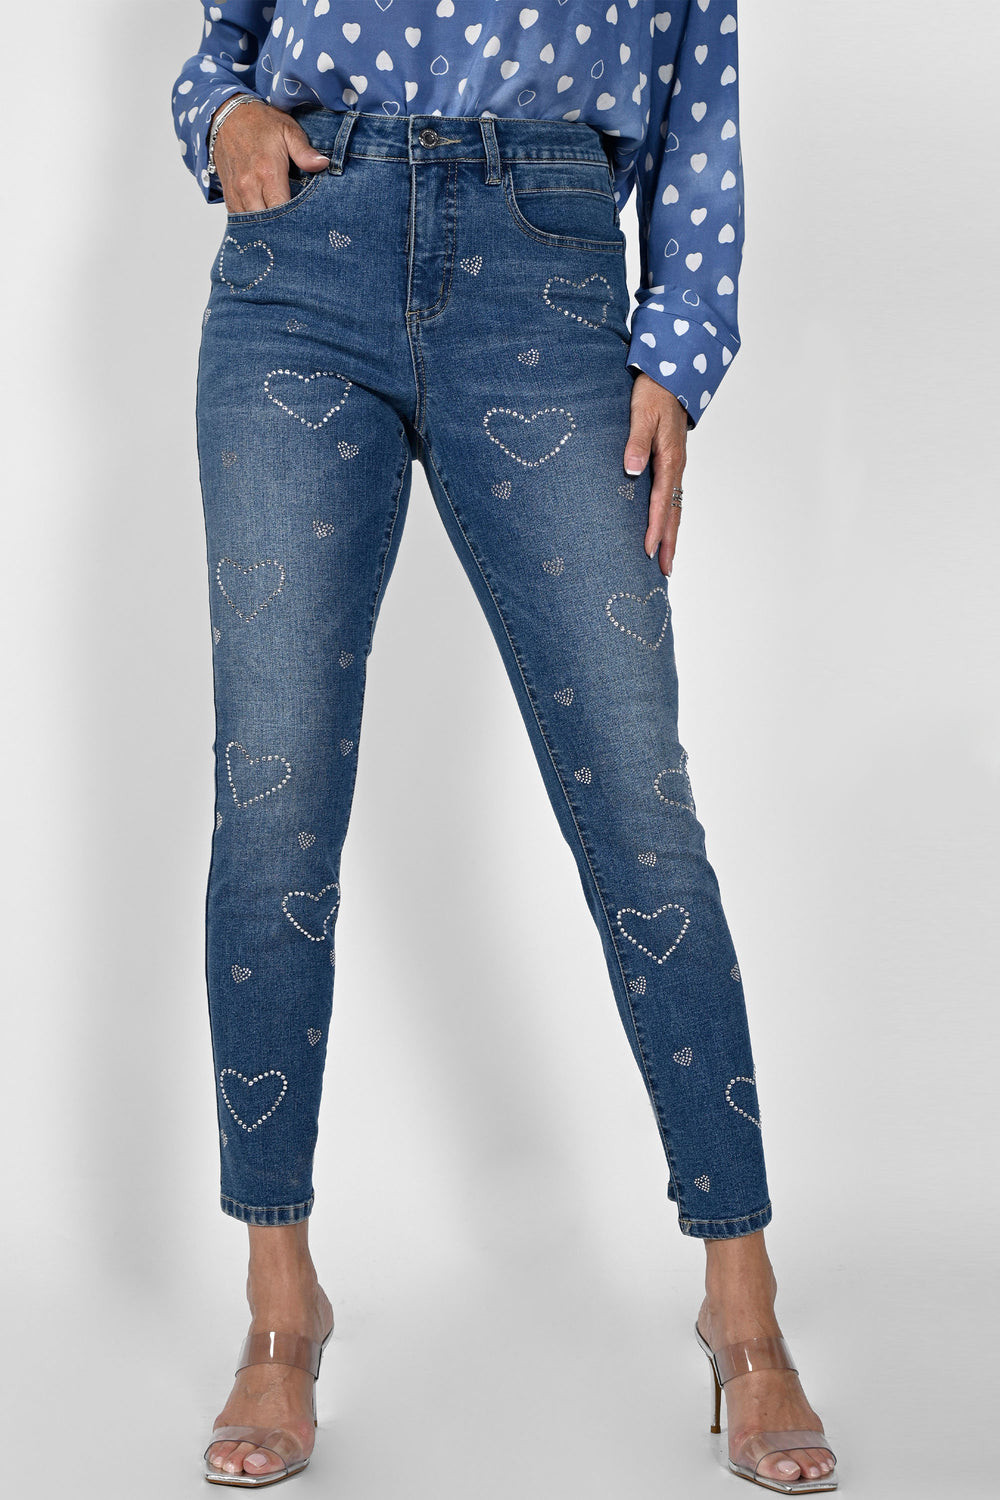 Frank Lyman Spring 2023 women's casual cotton denim jeans with rhinestones - front